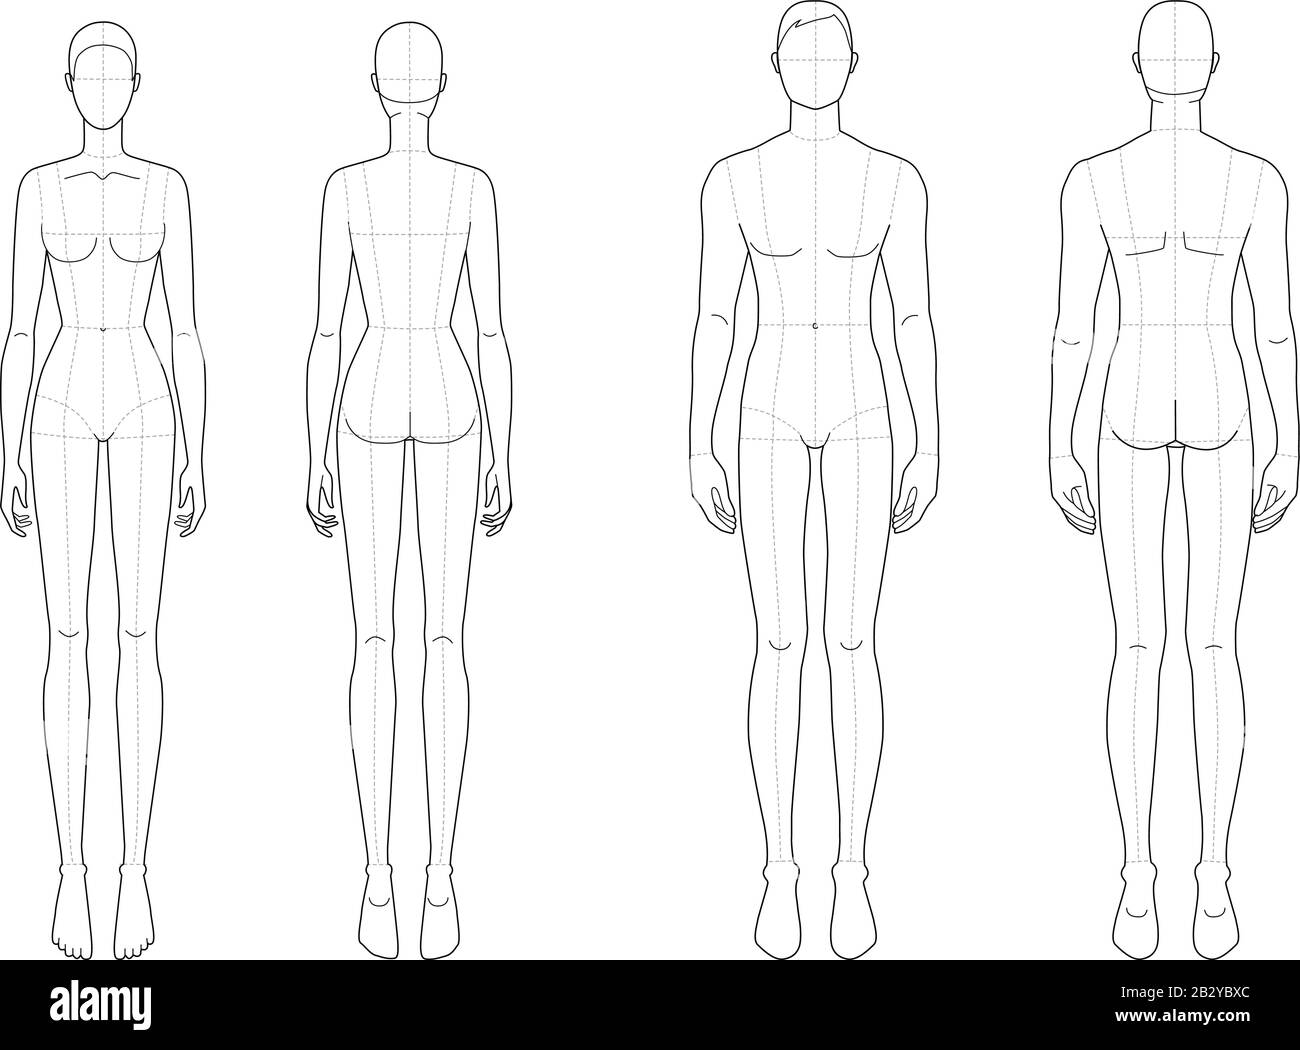 male-body-drawing-template